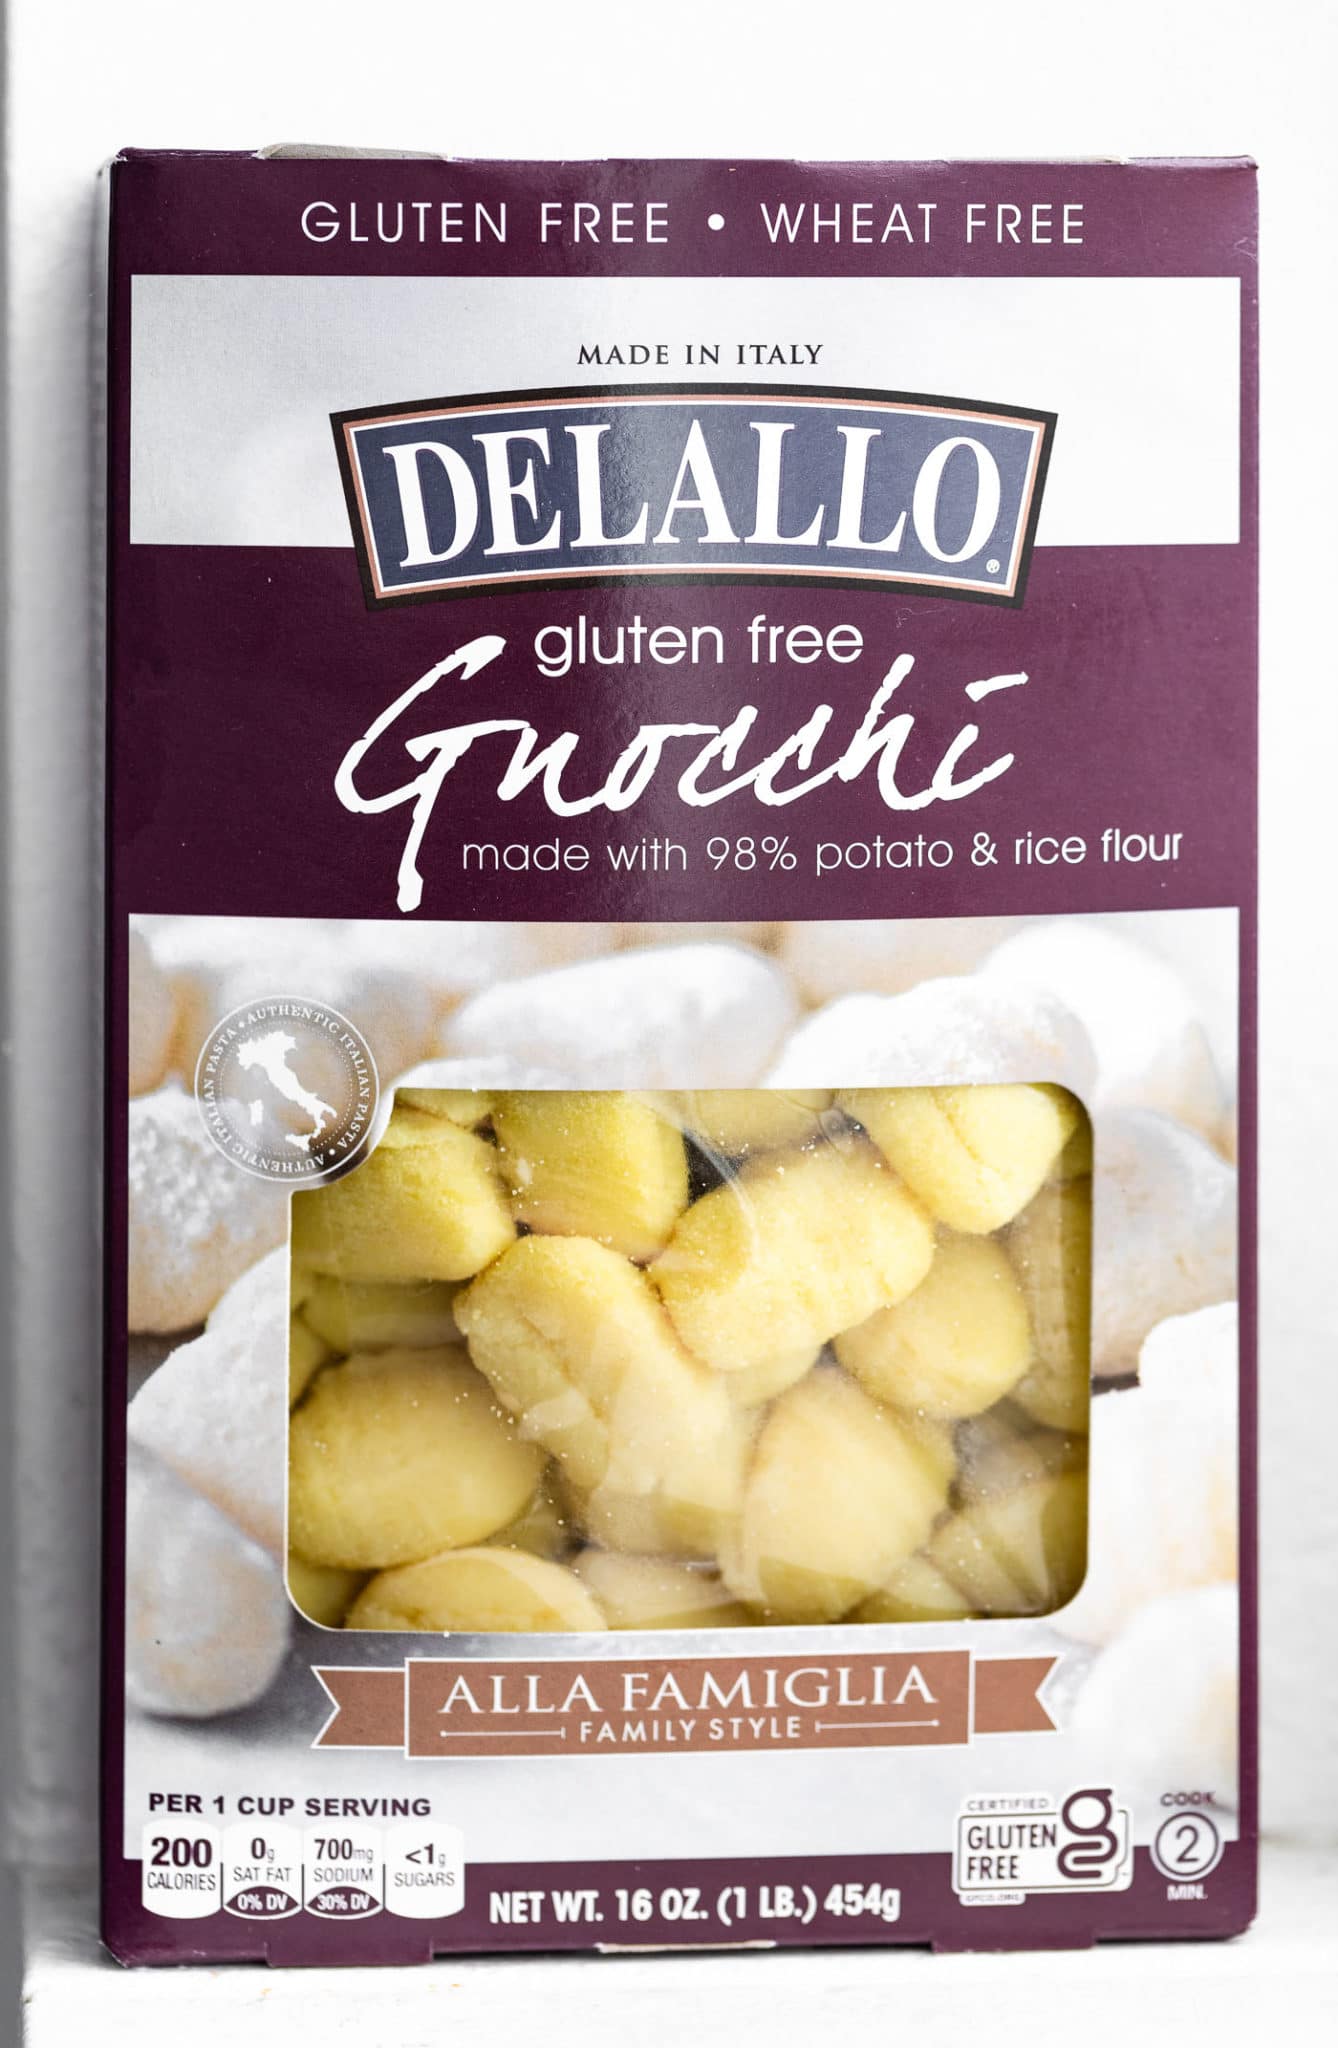 a box of delallo gluten free gnocchi with a cut out near the bottom showing the uncooked pieces of gnocchi